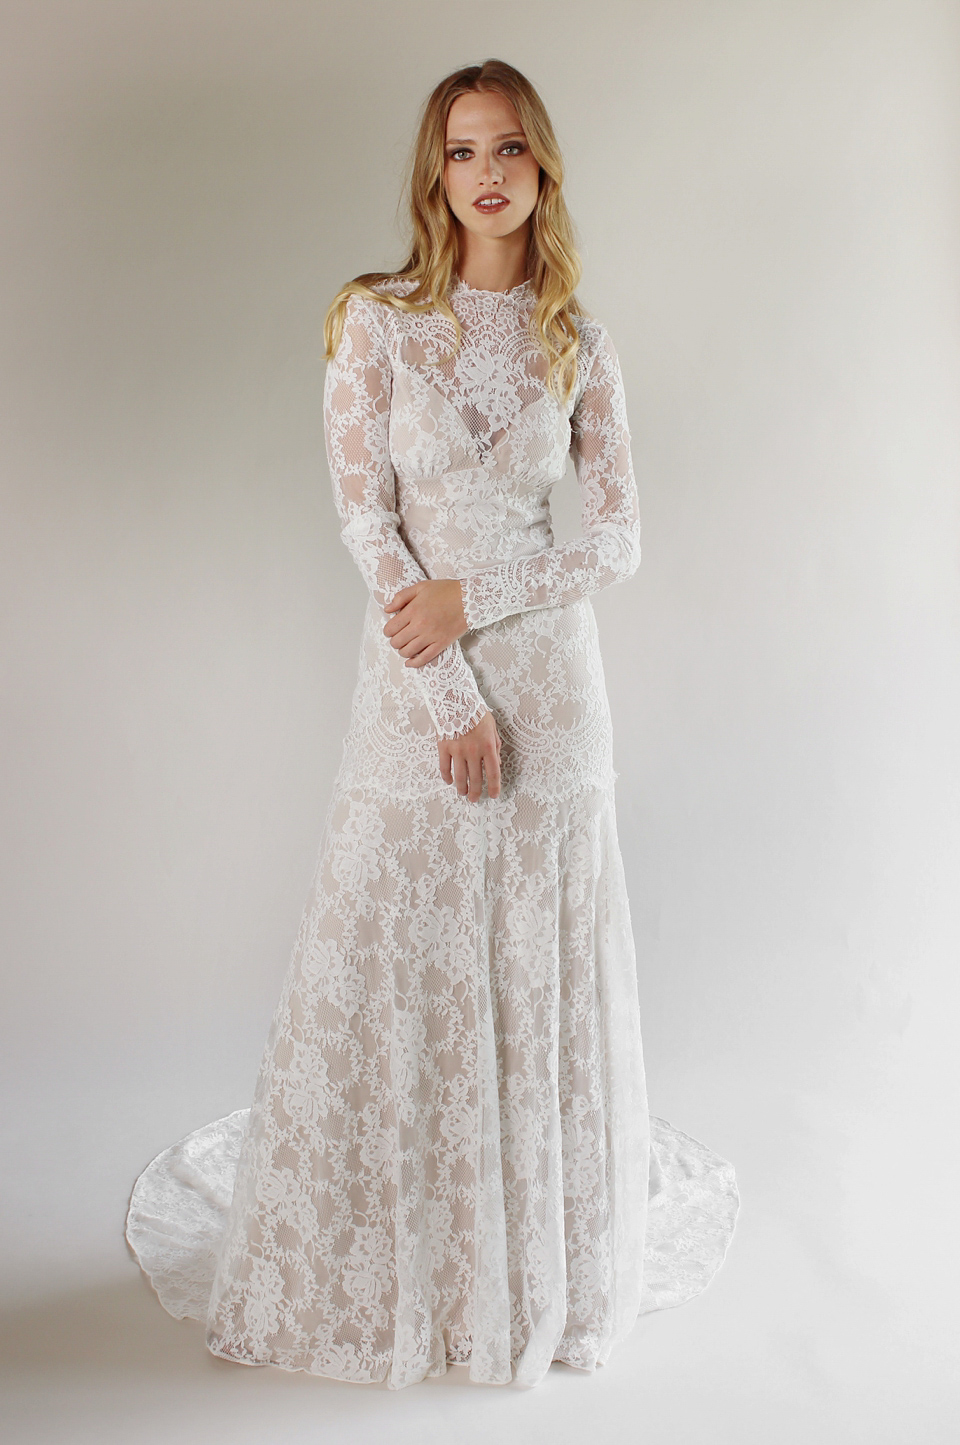 California Dreamin' - the new Romantique by Claire Pettibone collection for Spring/Summer 2017.